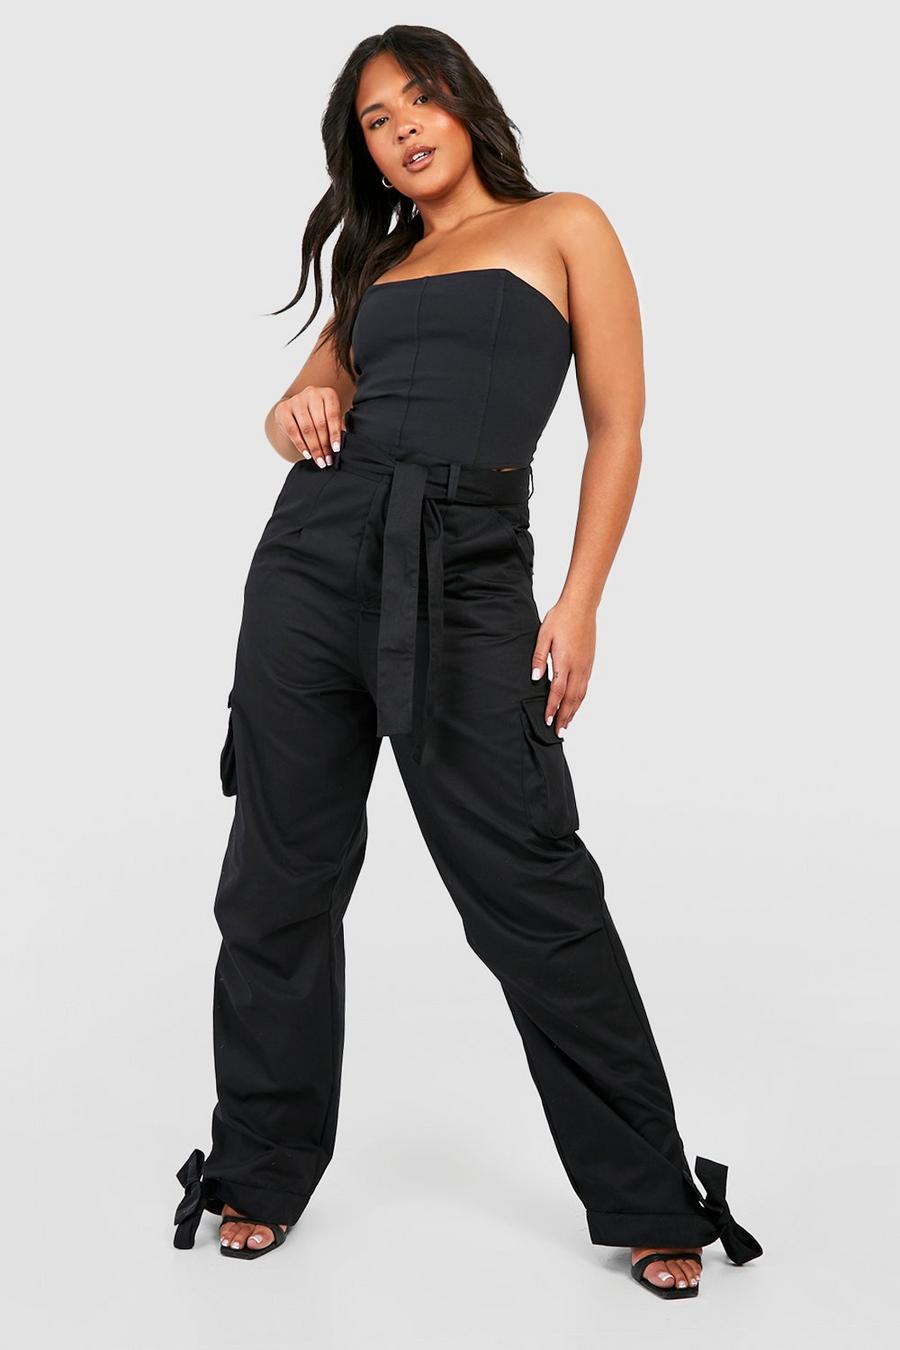 Womens Clothing Trousers Boohoo Lace Plus Tie Hem Slim Fit Cargo Trousers in Black Slacks and Chinos Cargo trousers Blue 